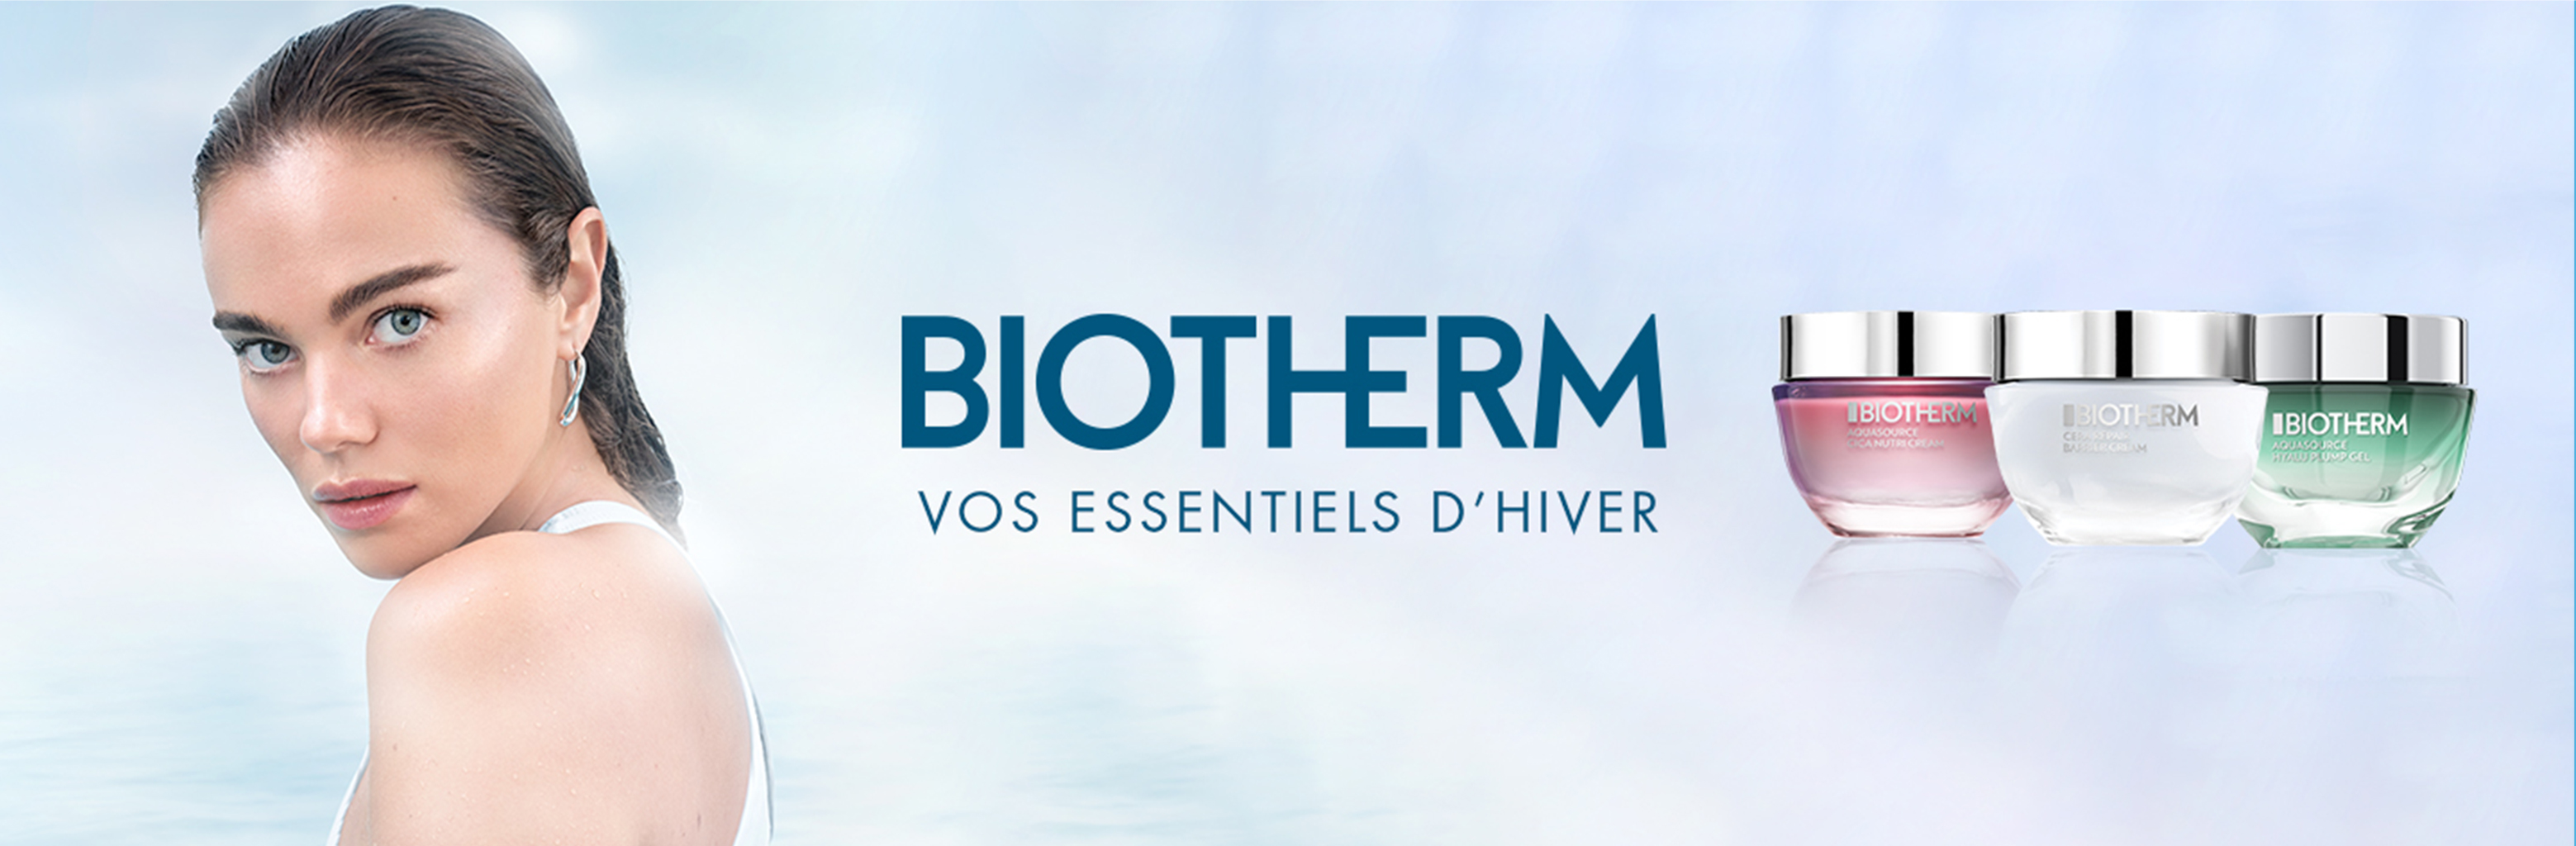 Biotherm Homme : Marque N°1 Mondiale* | 30 ans d'expertise soin pour homme